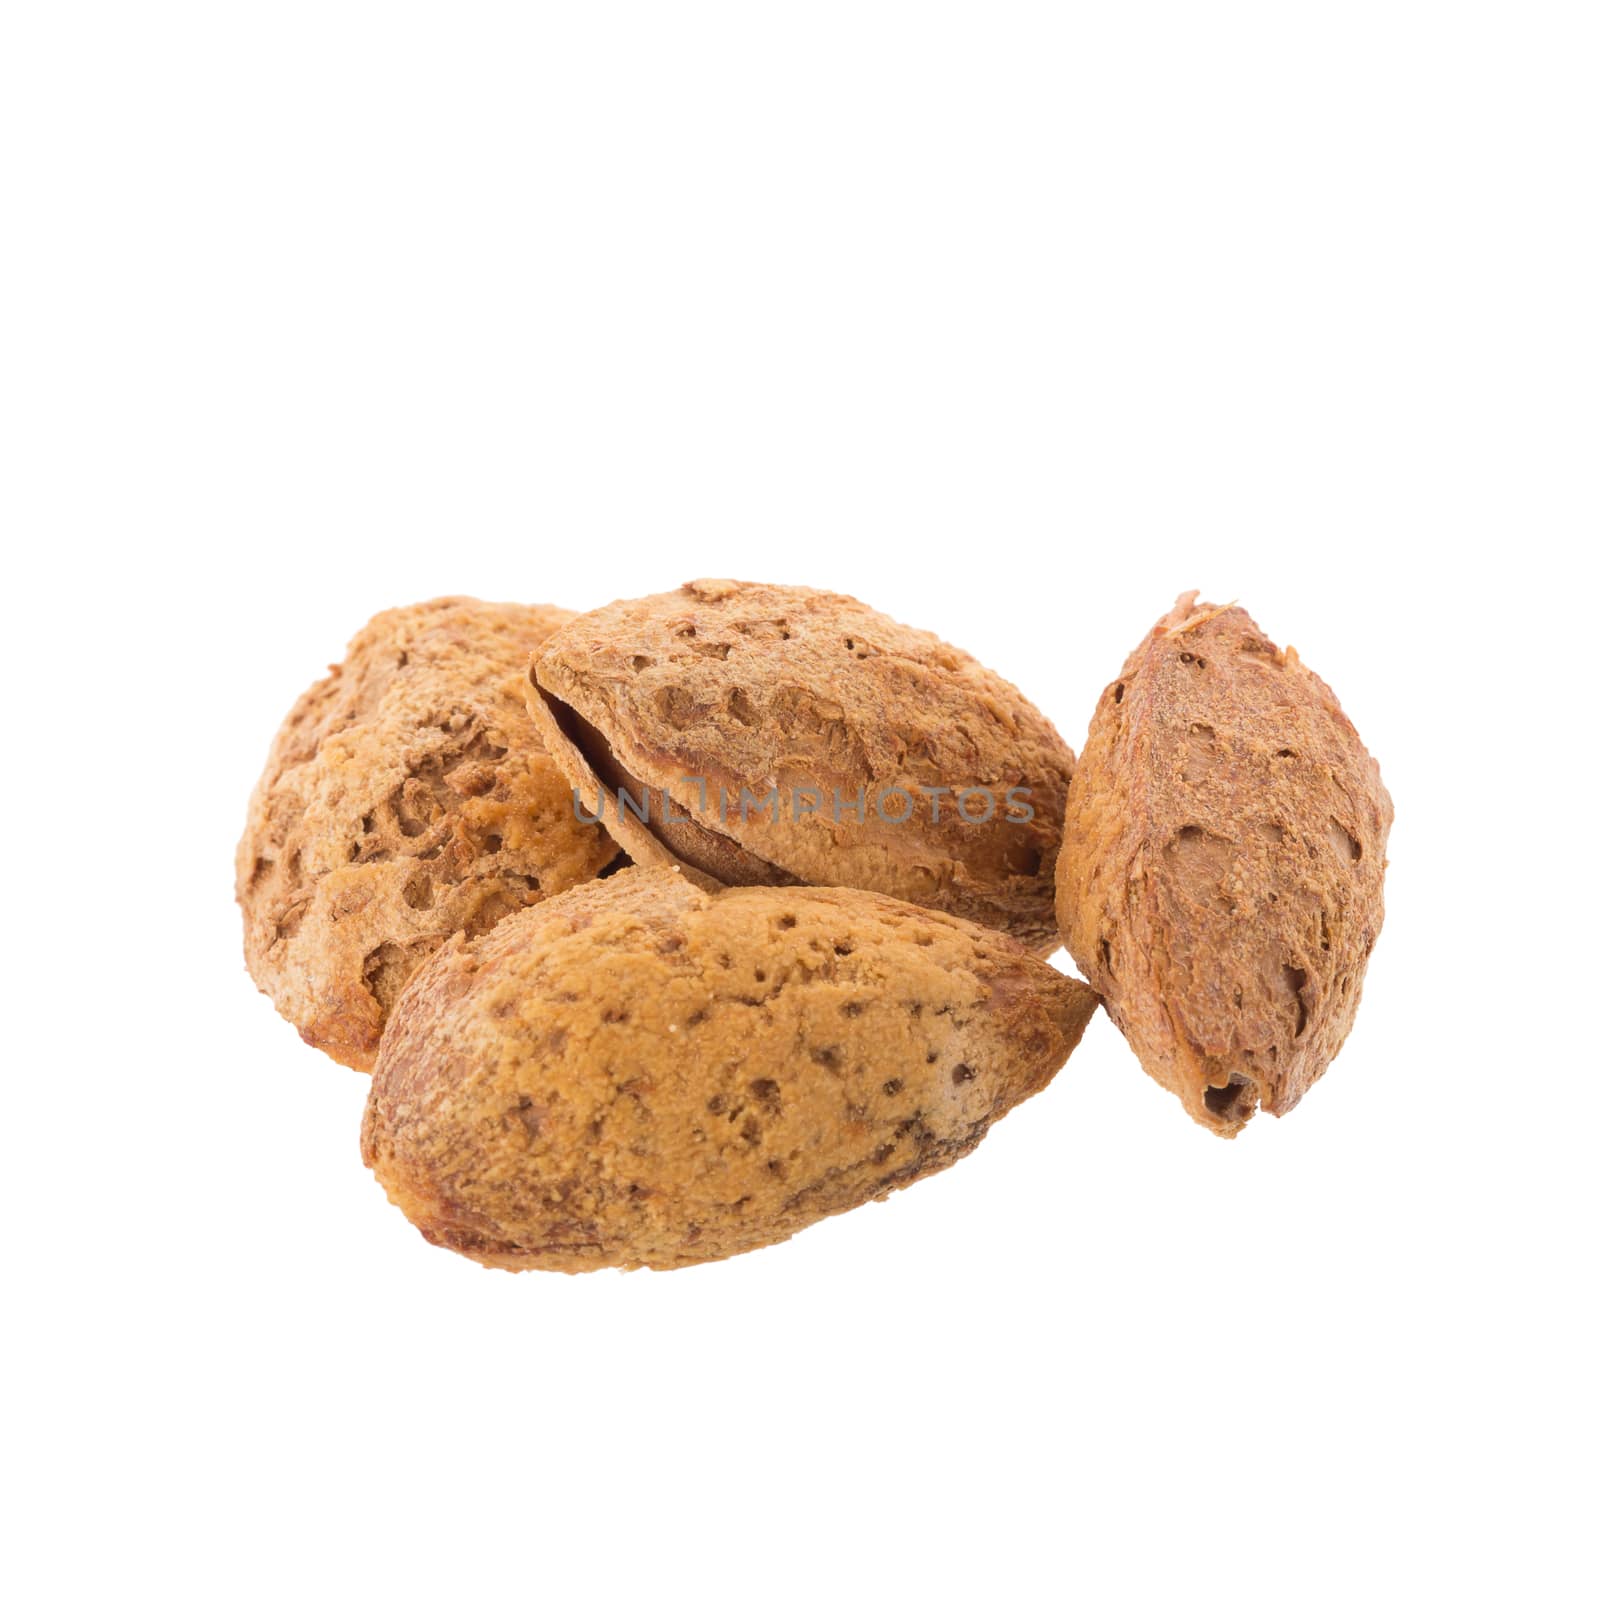 Almond nut in shell isolated on white background.